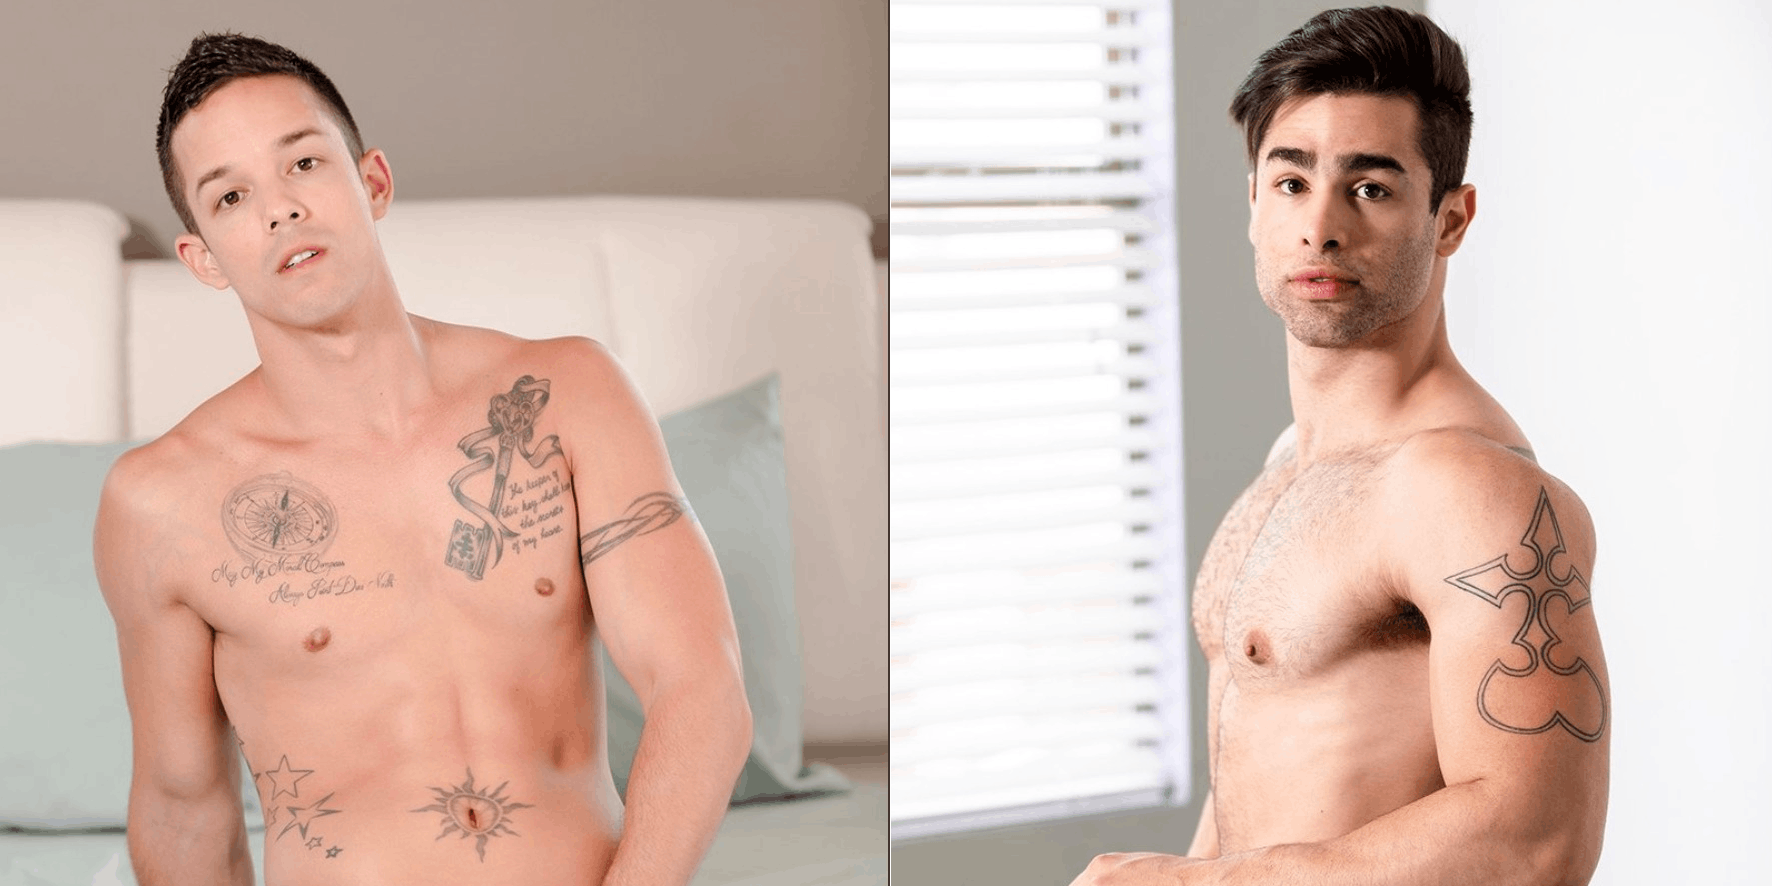 Icon Male delivers on its promise of high-class gay erotica